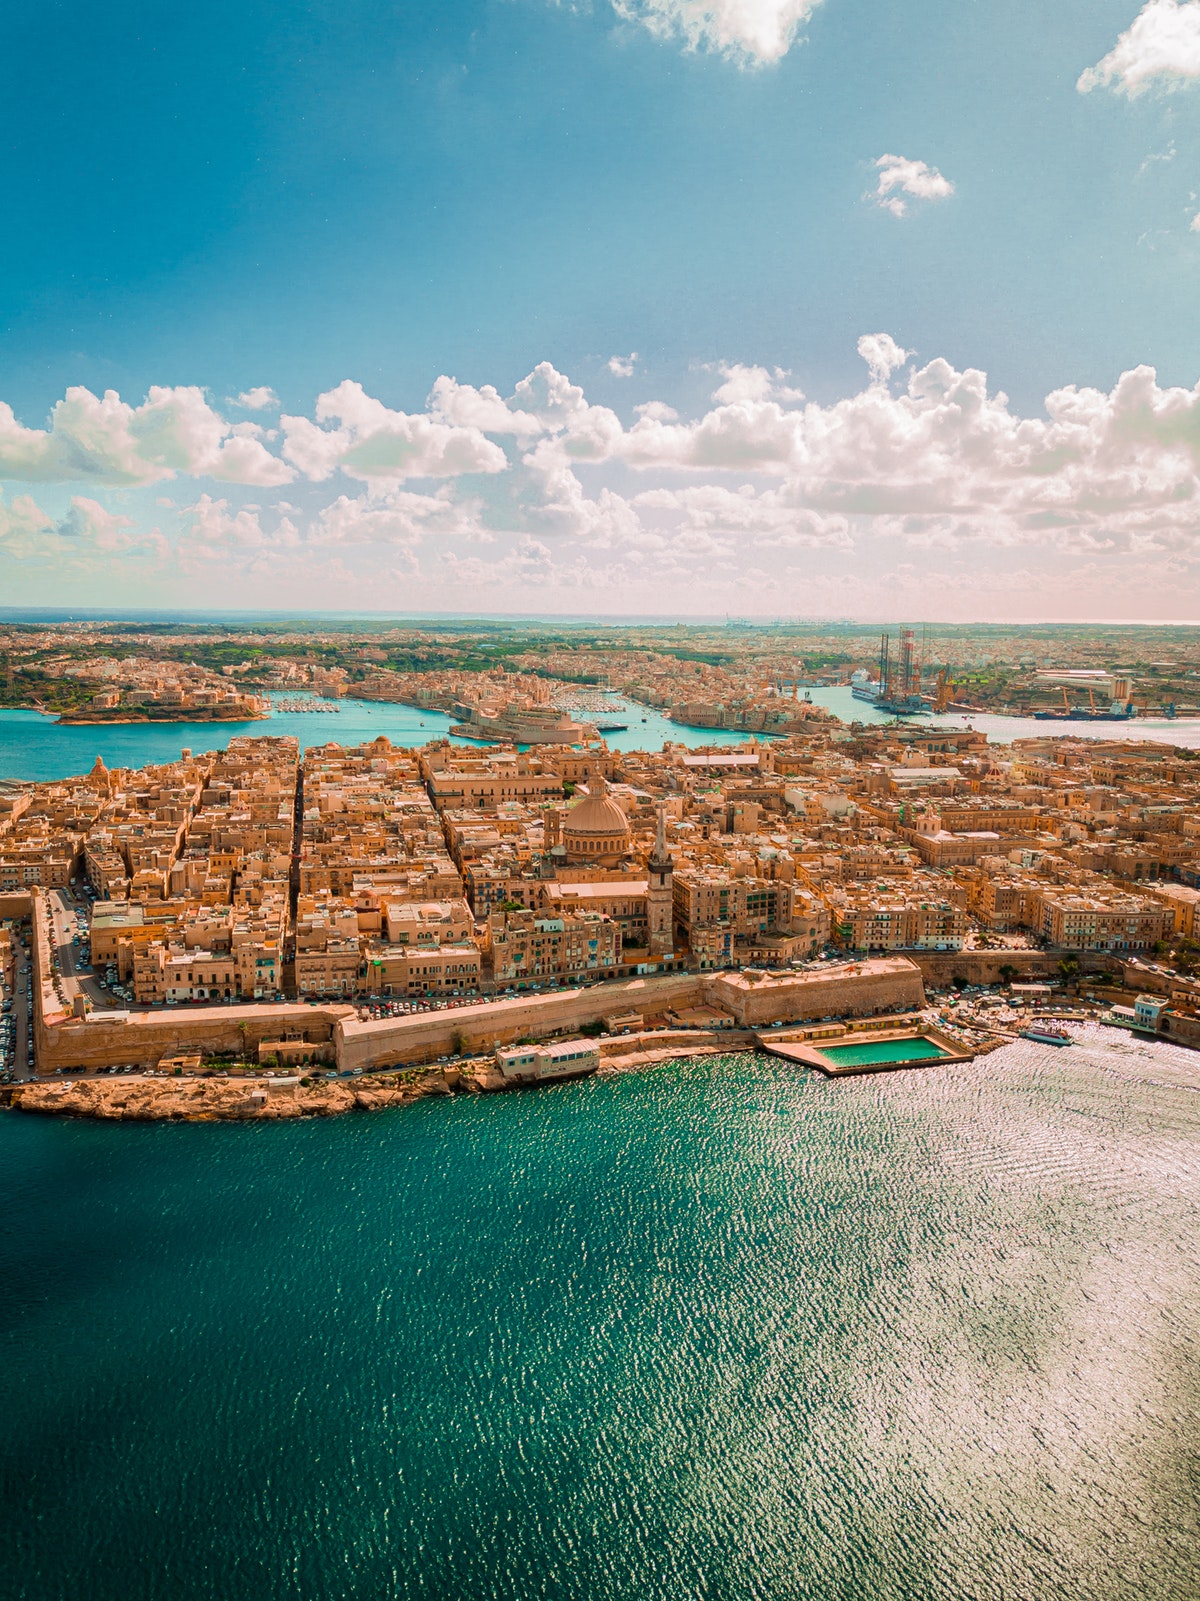 Why is Malta the paradise island of iGaming and blockchain?